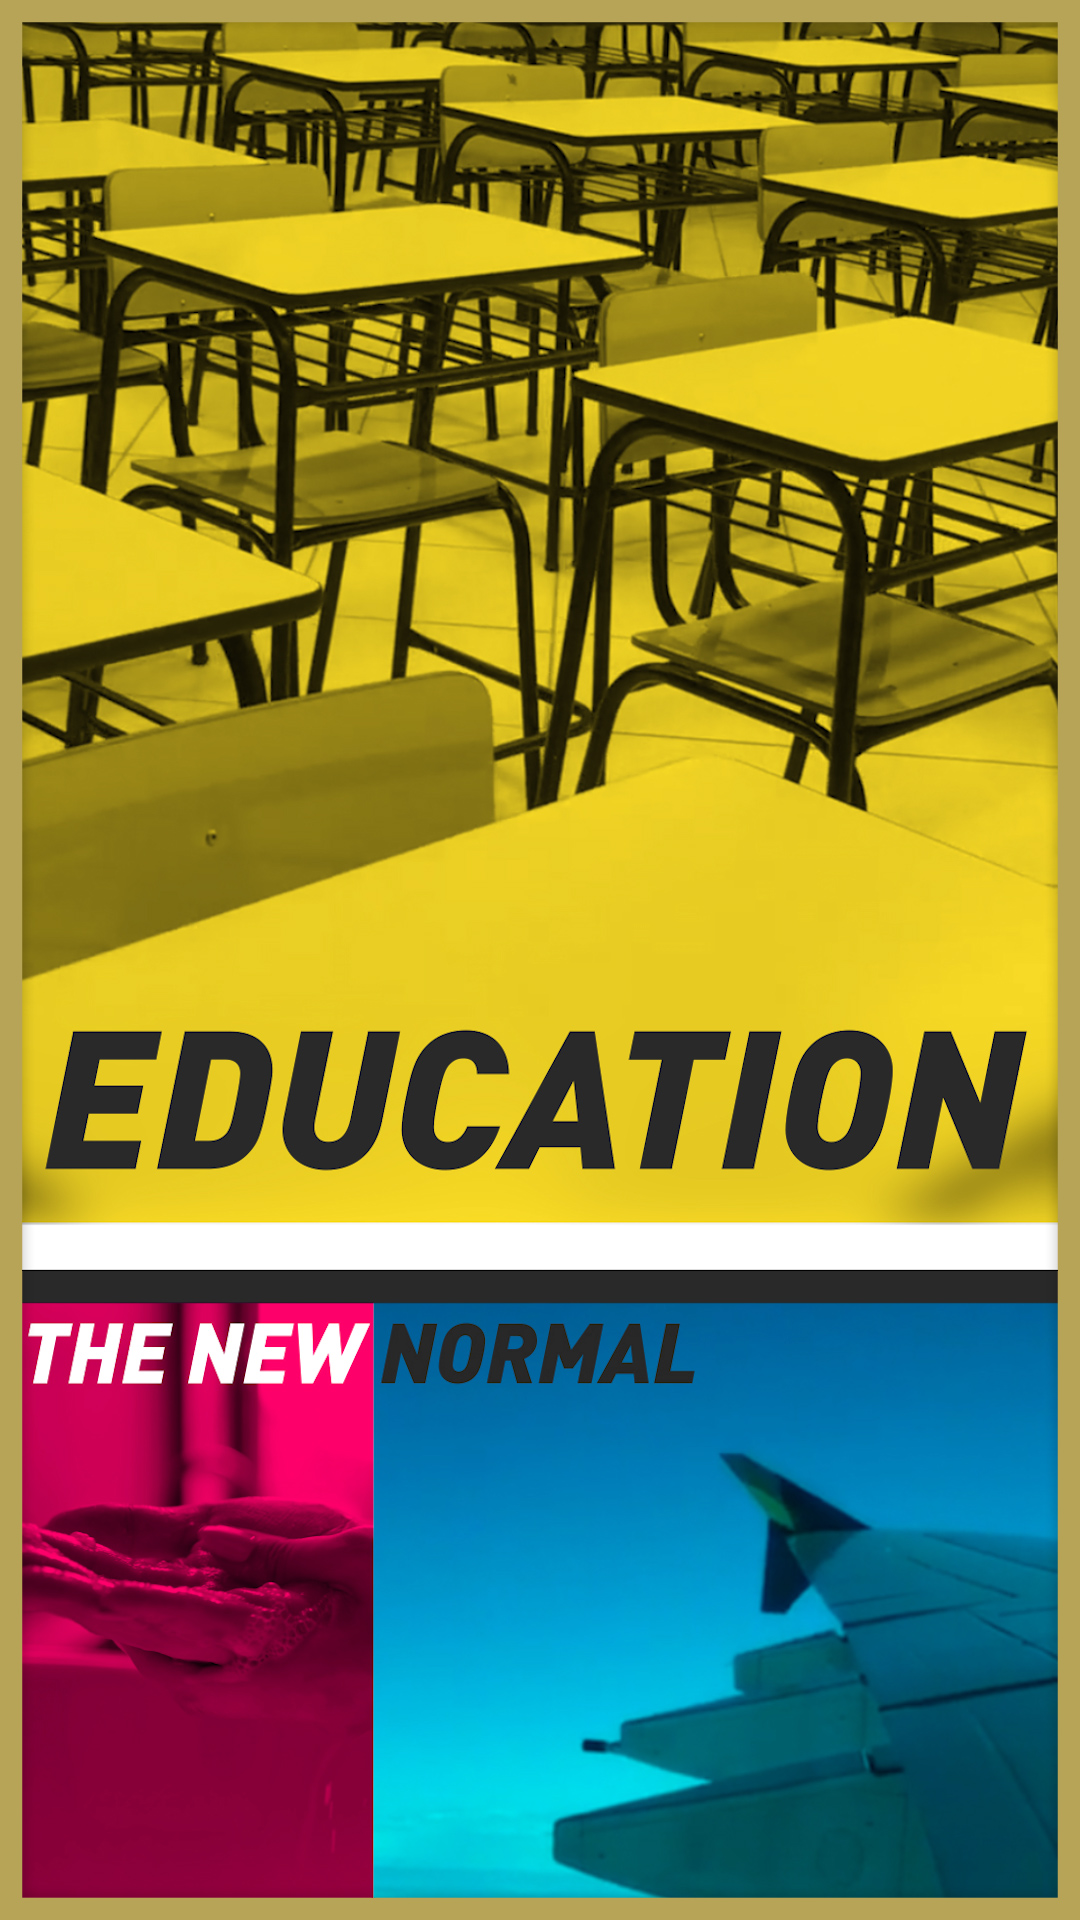 essay on the education system in the new normal